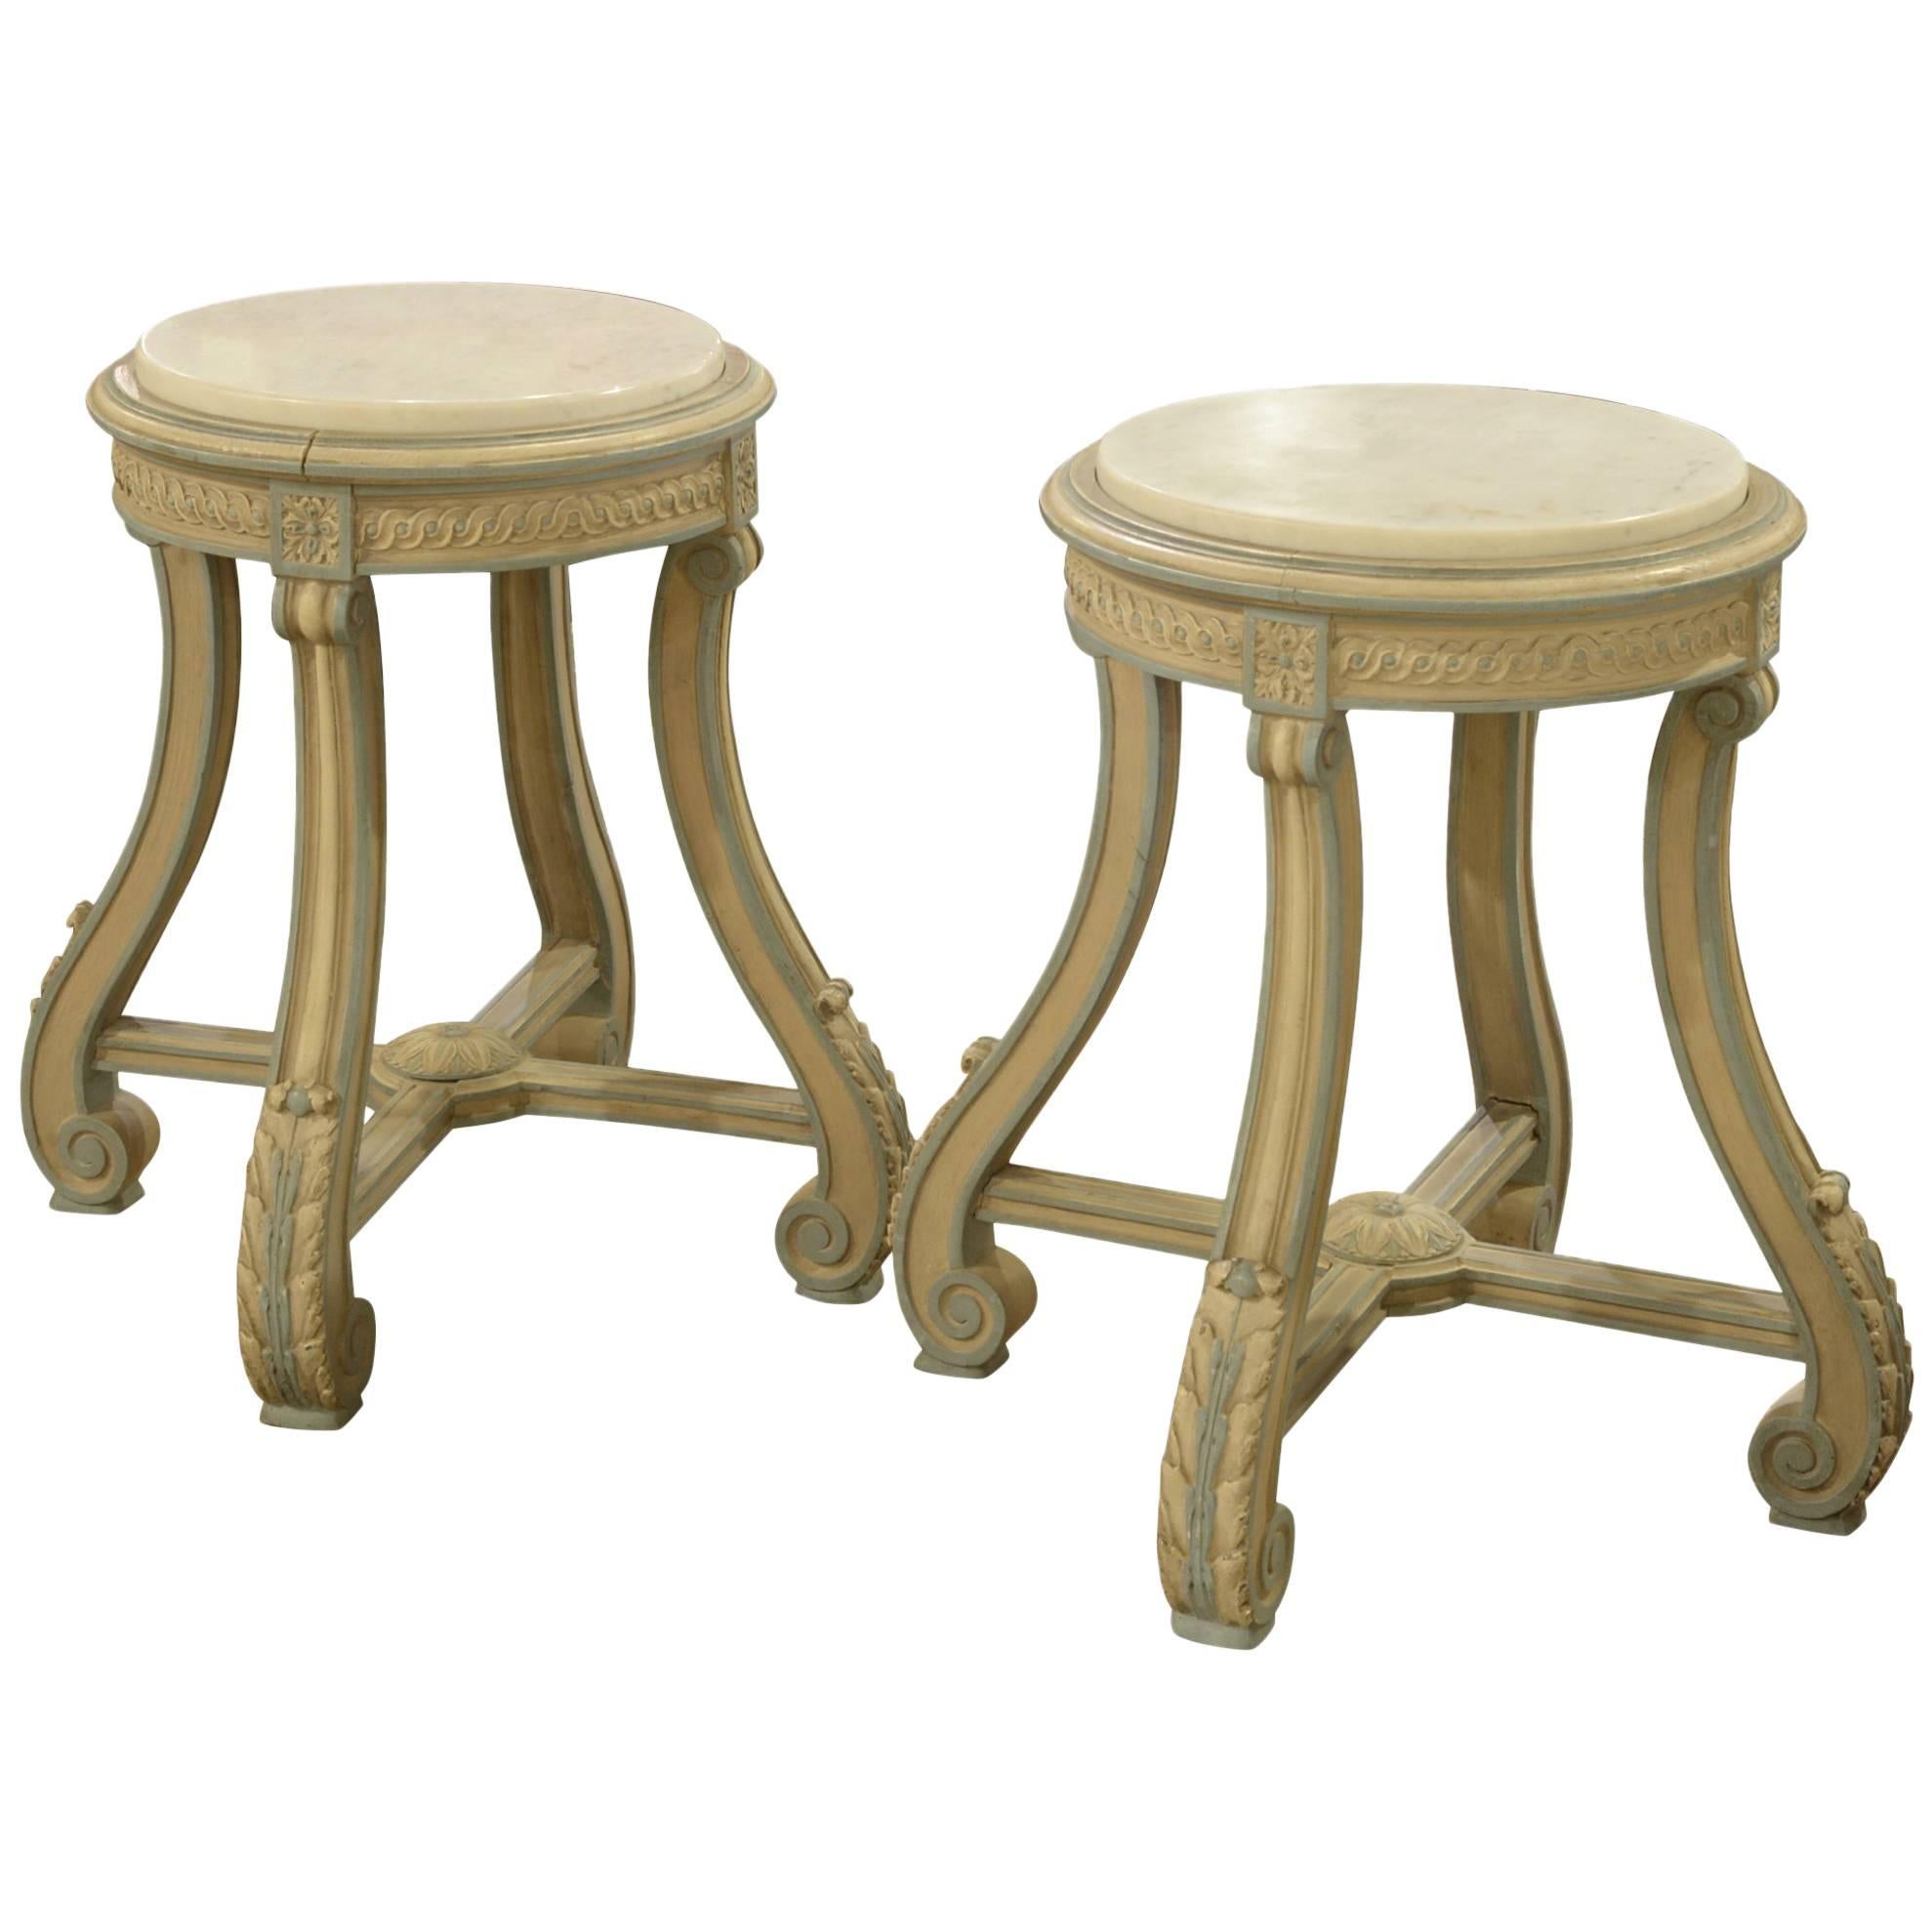 Pair of Late 19th Century Urn Stands